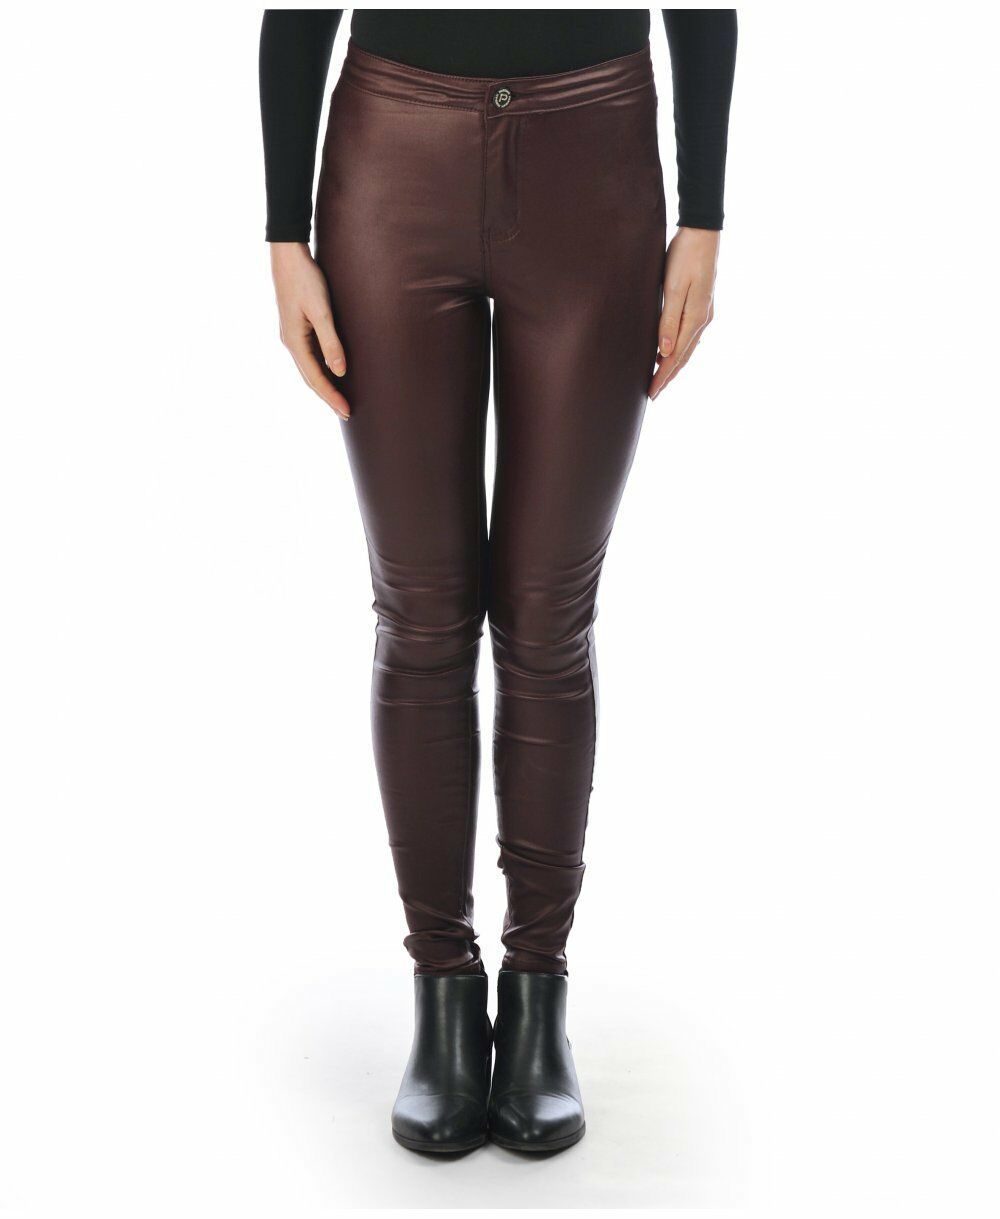 Plum High Waisted Leather Look Skinny Jeans - Front Close View